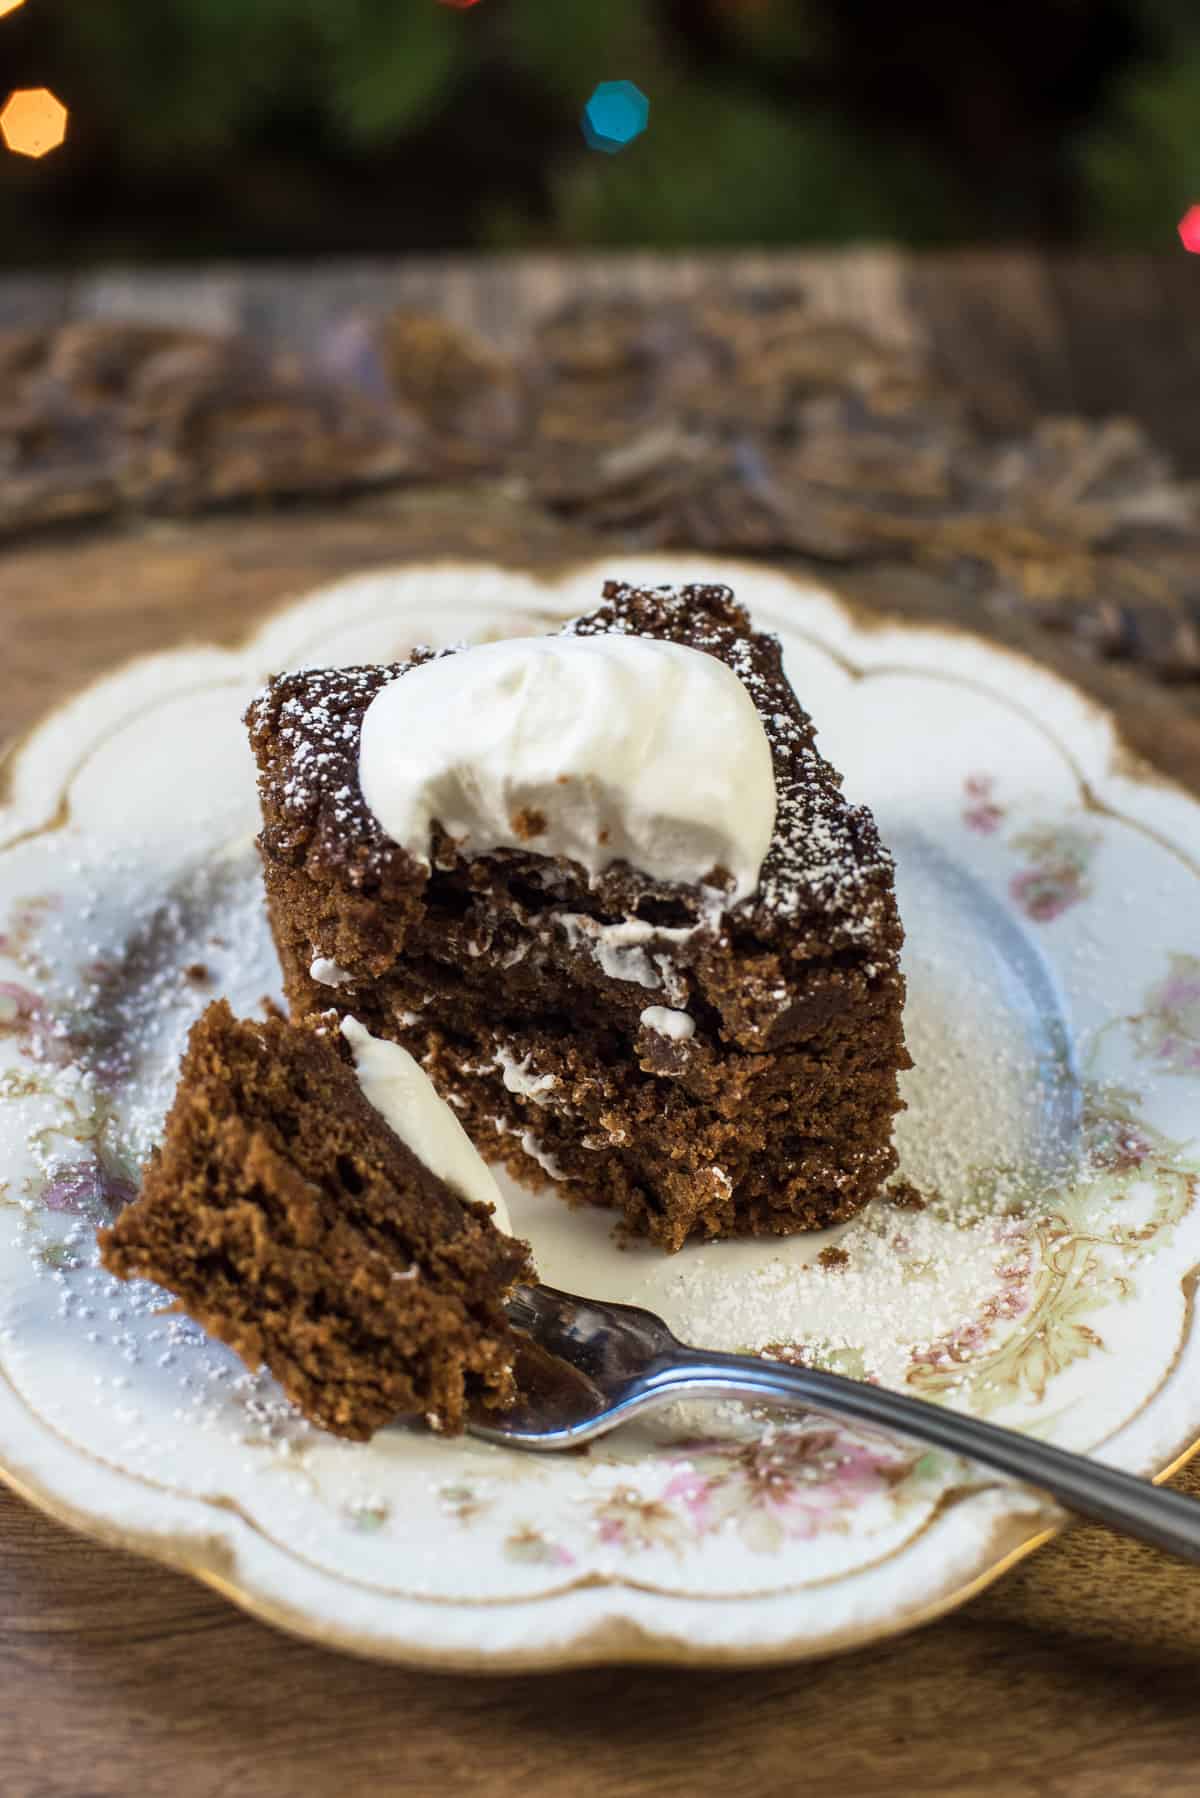 A fork resting on a plate after pulling away a bite of gingerbread cake.